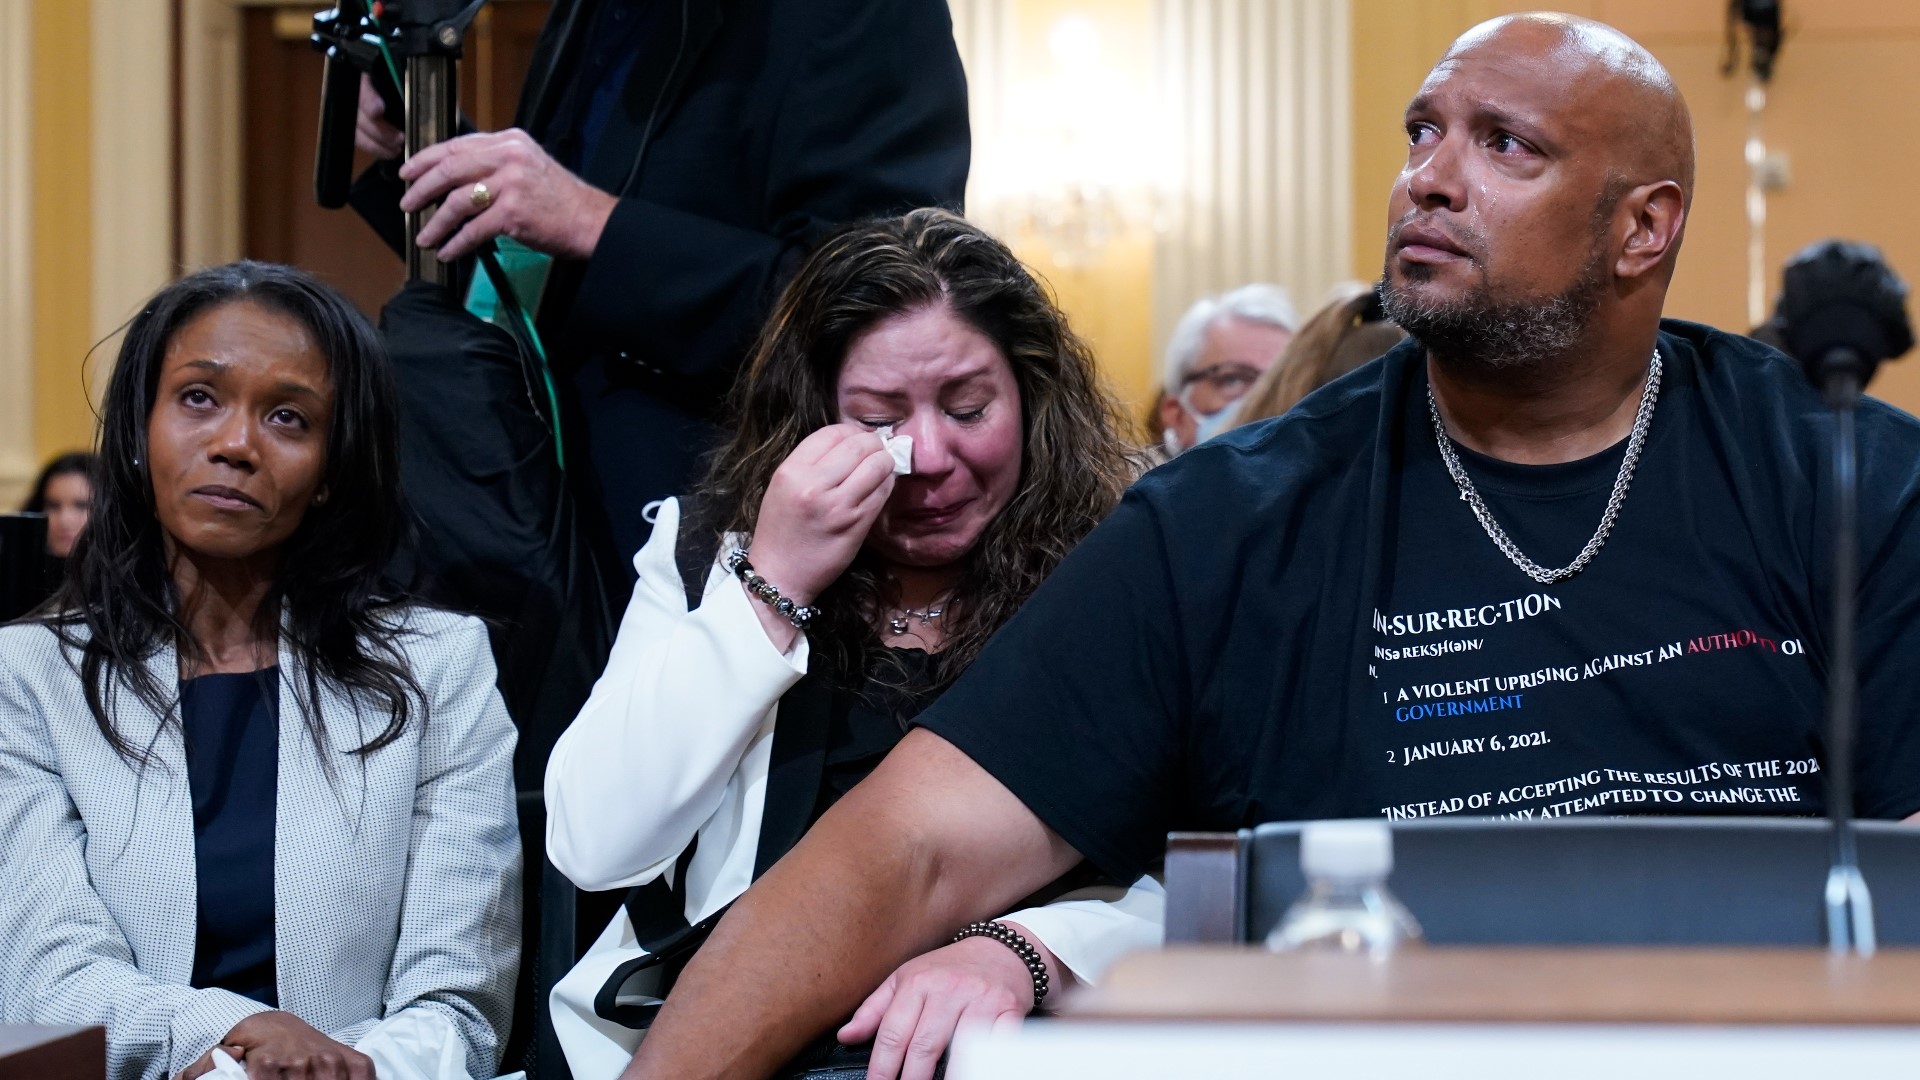 The first day of public testimony featured previously unseen footage of the attack on the Capitol and answers from people on the ground as it unfolded.